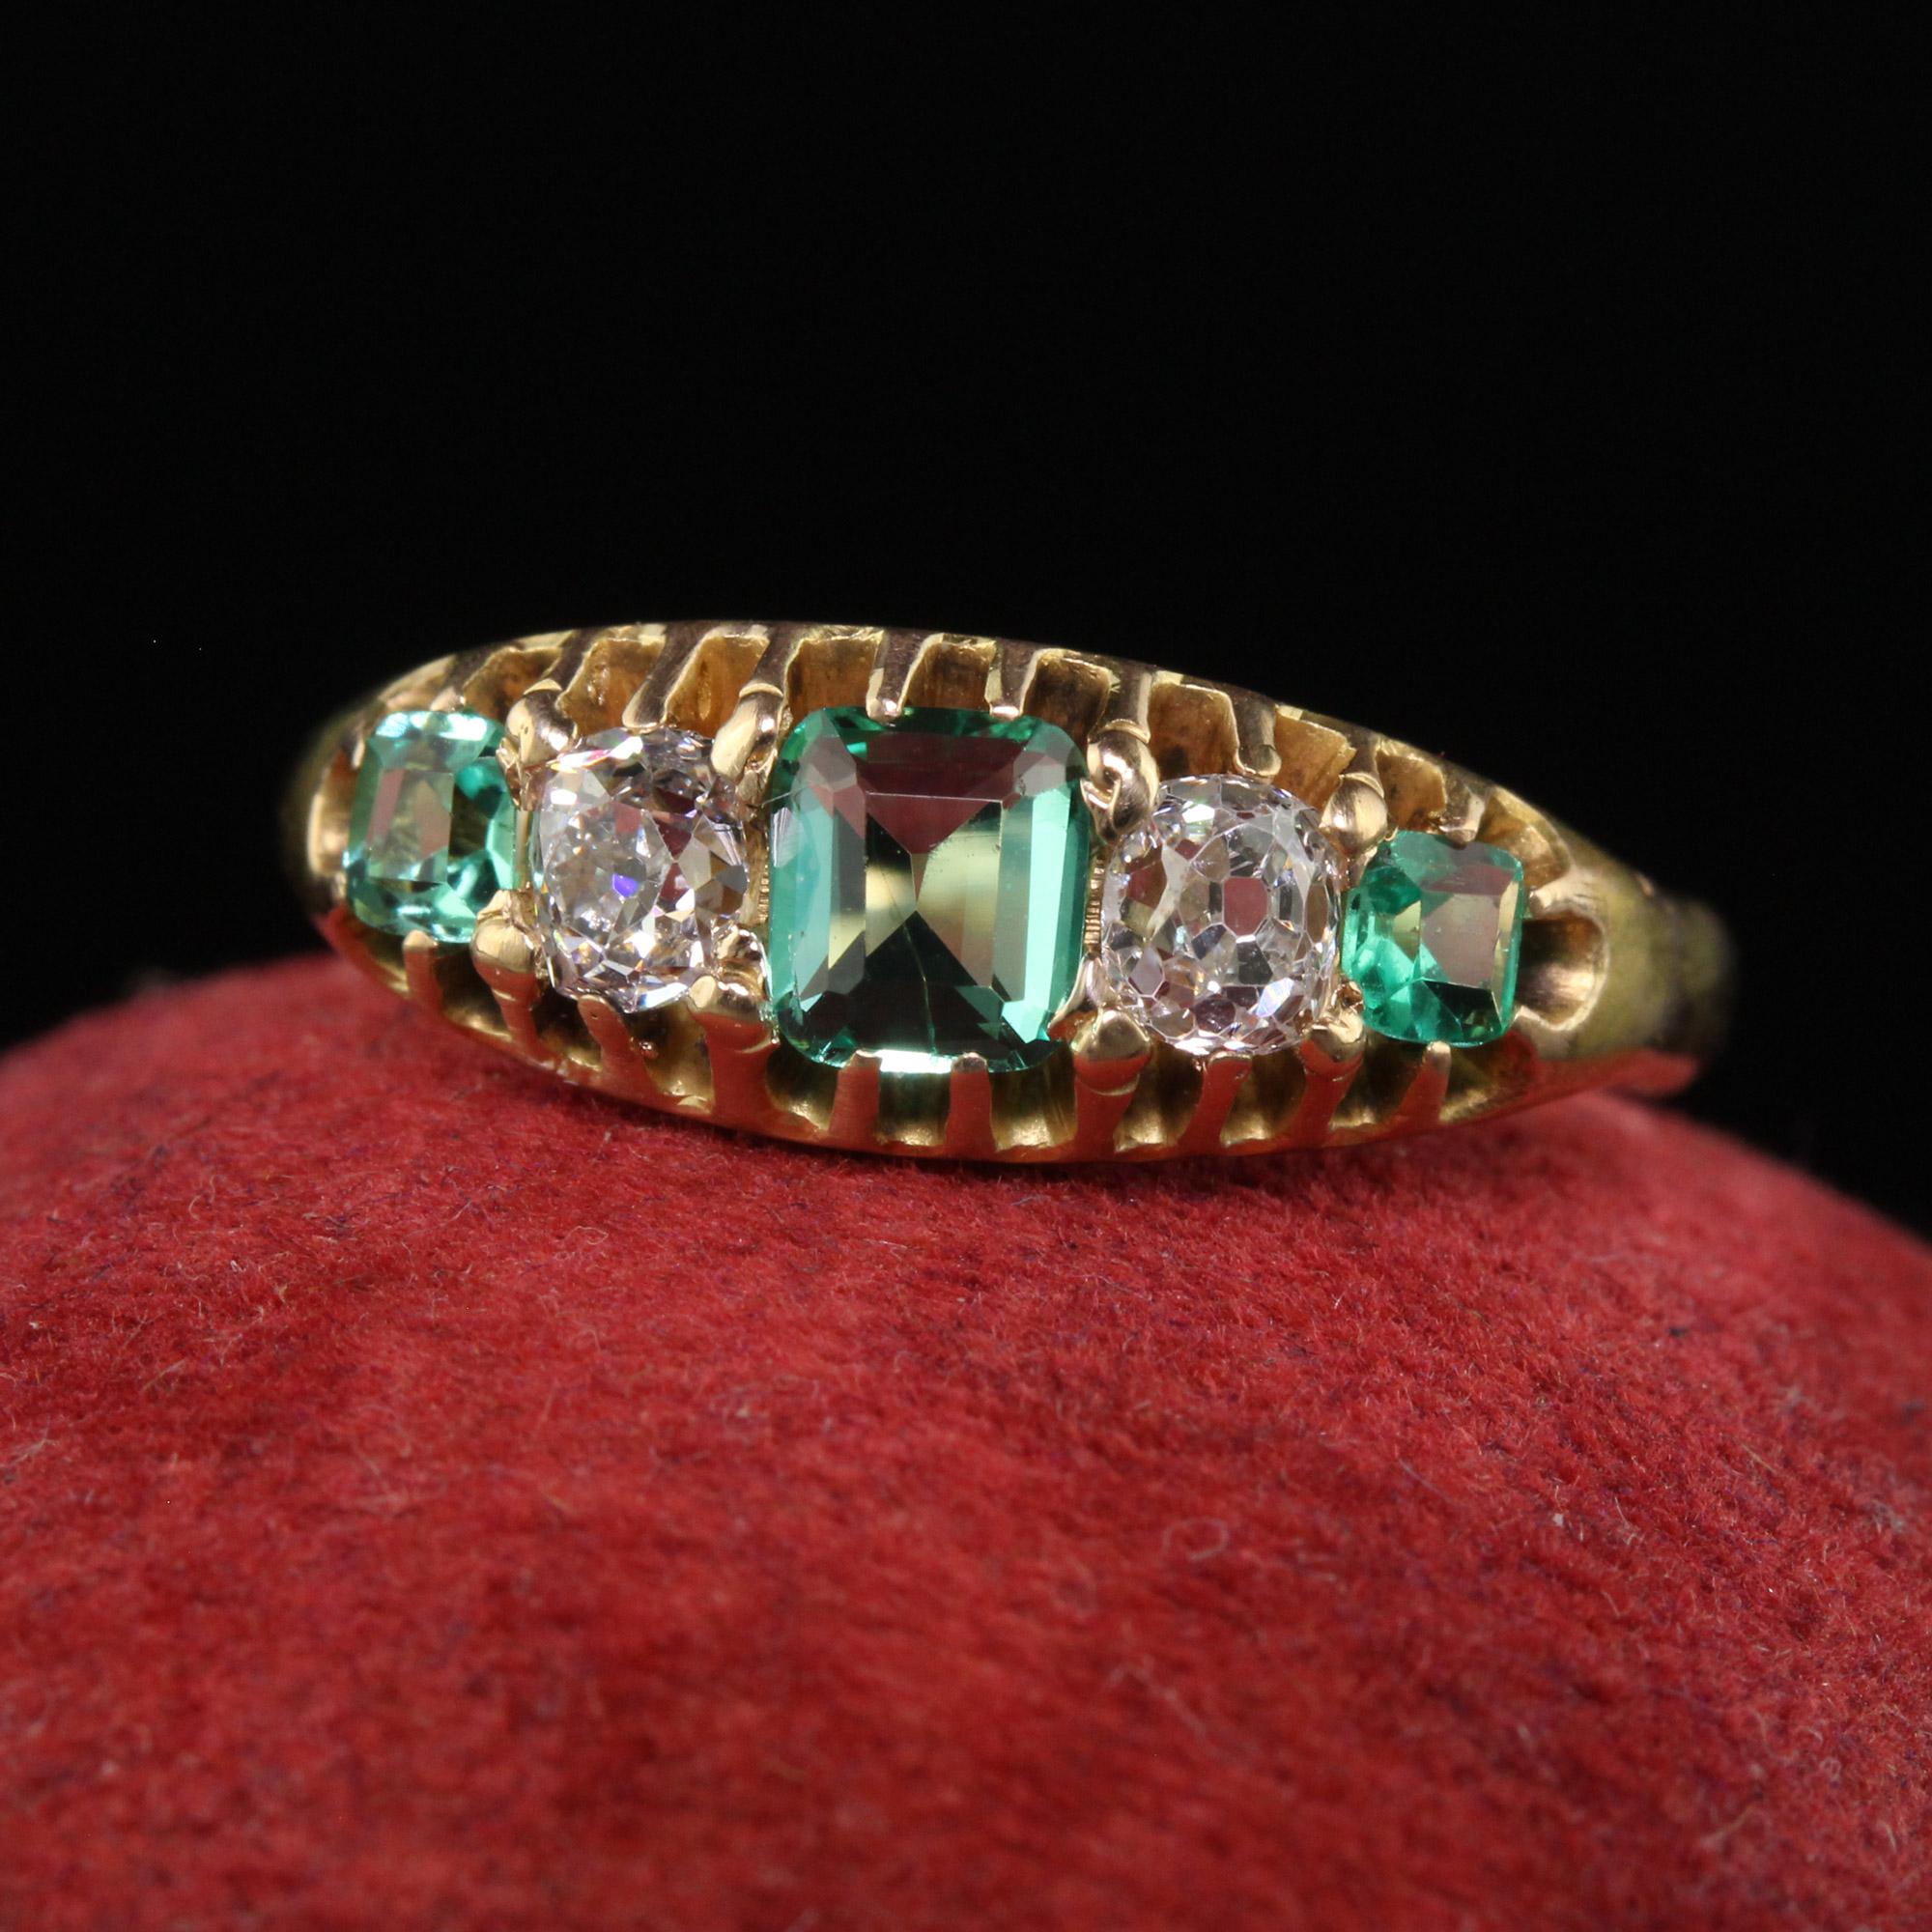 Beautiful Antique Victorian 14K Yellow Gold Old Mine Diamond and Emerald Five Stone Ring. This gorgeous Victorian old mine diamond and emerald ring is crafted in 14k yellow gold. The top of the ring features three chunky old cut emeralds and two old